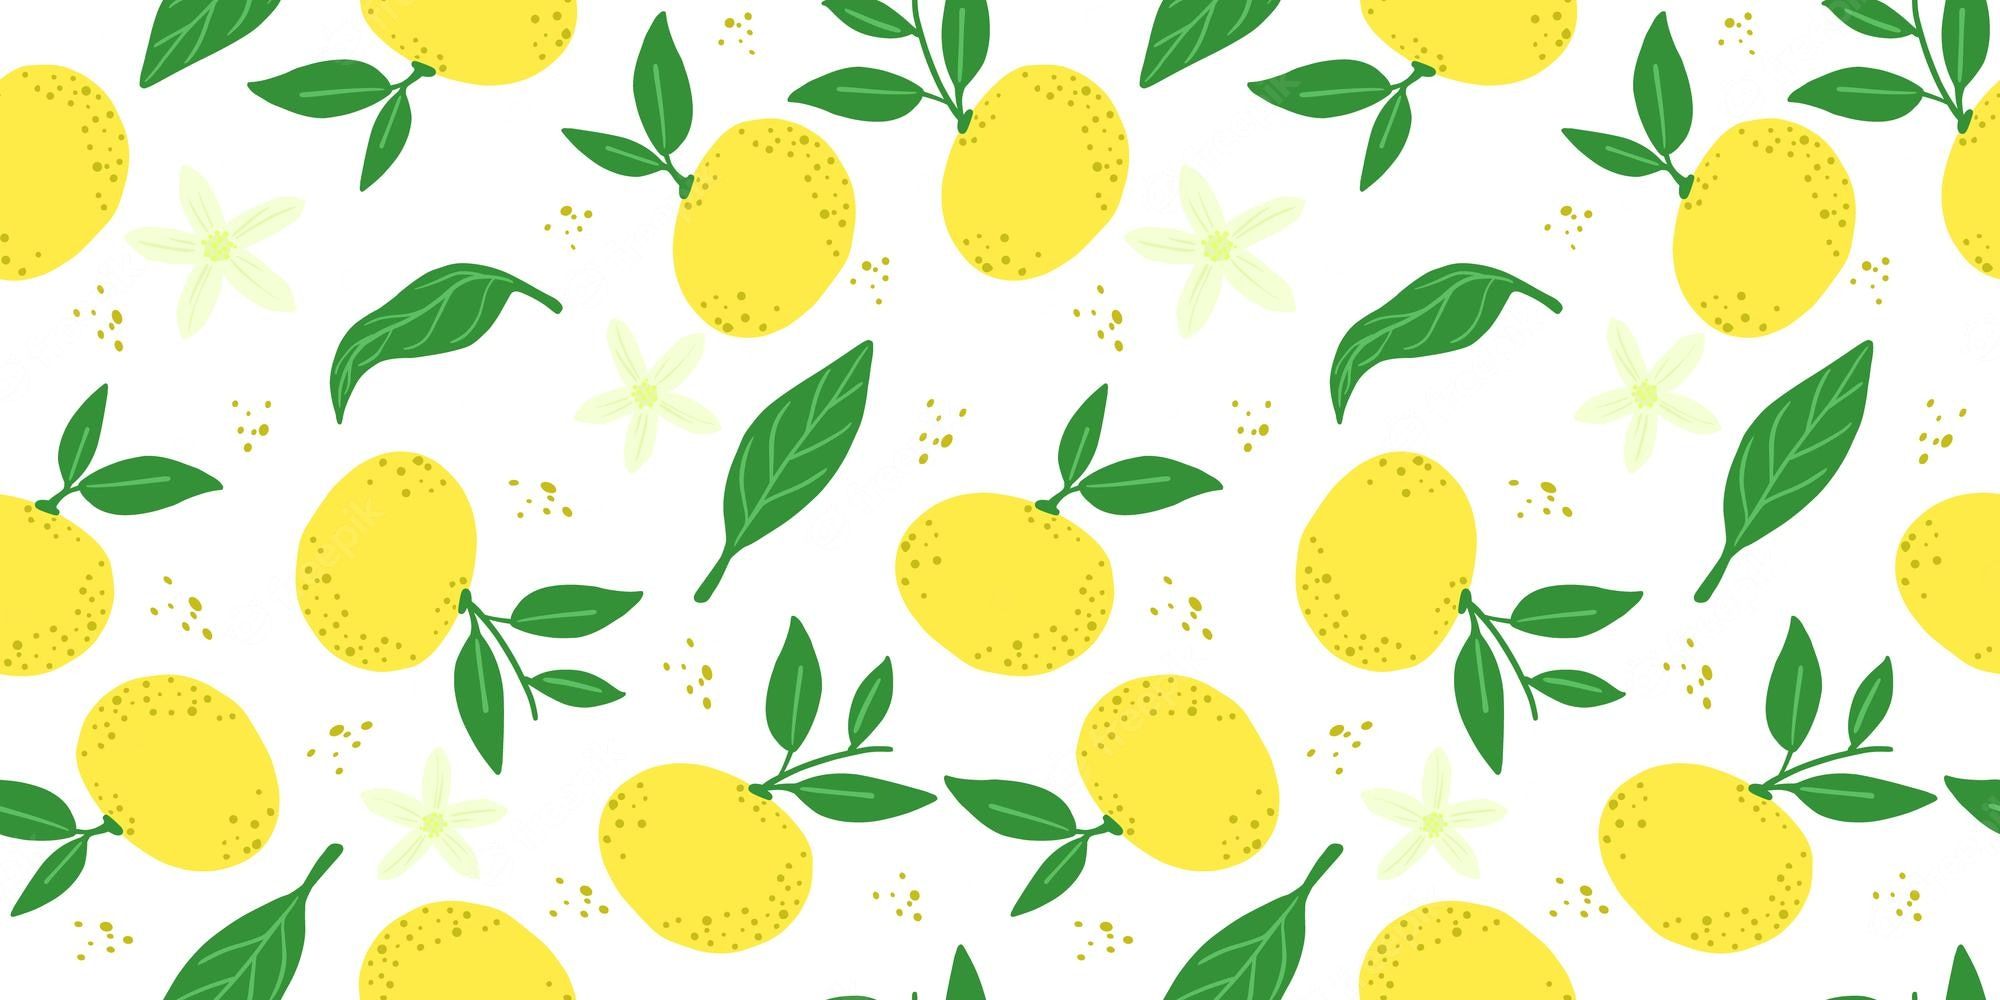 A seamless pattern of lemons and leaves on a white background - Lemon, fruit